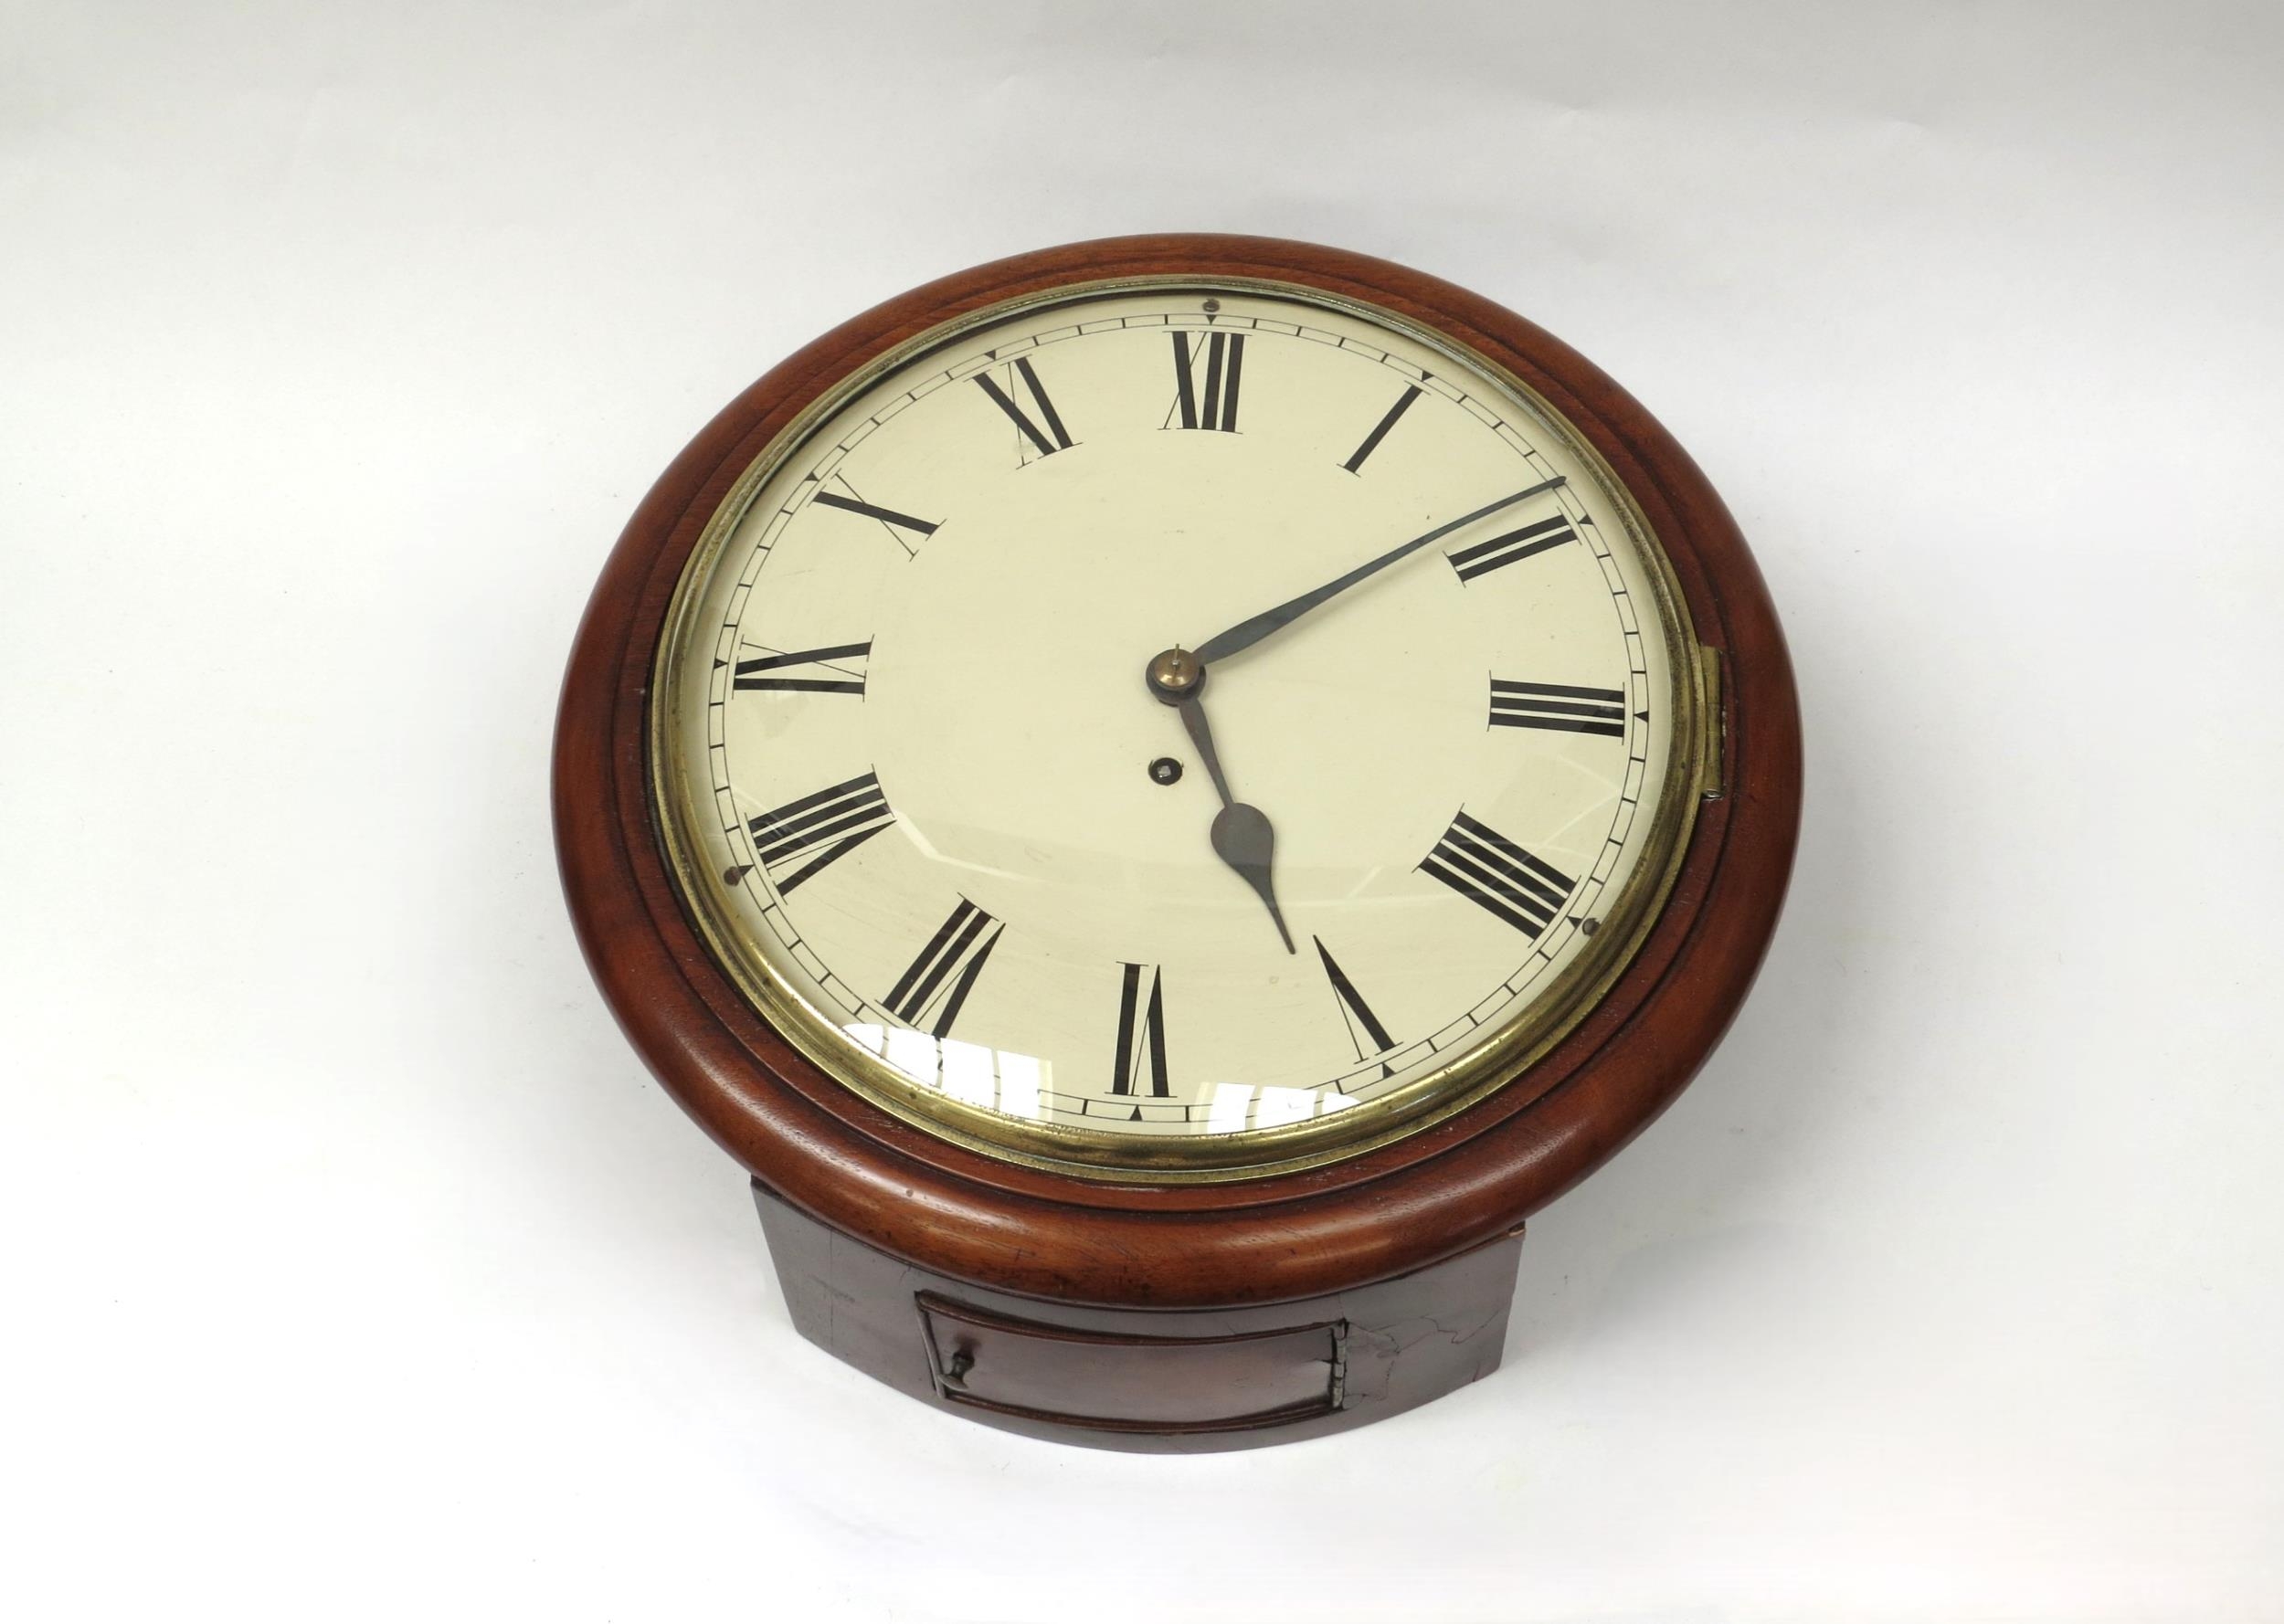 A 12" fusee dial wall clock with convex dial, with key & pendulum